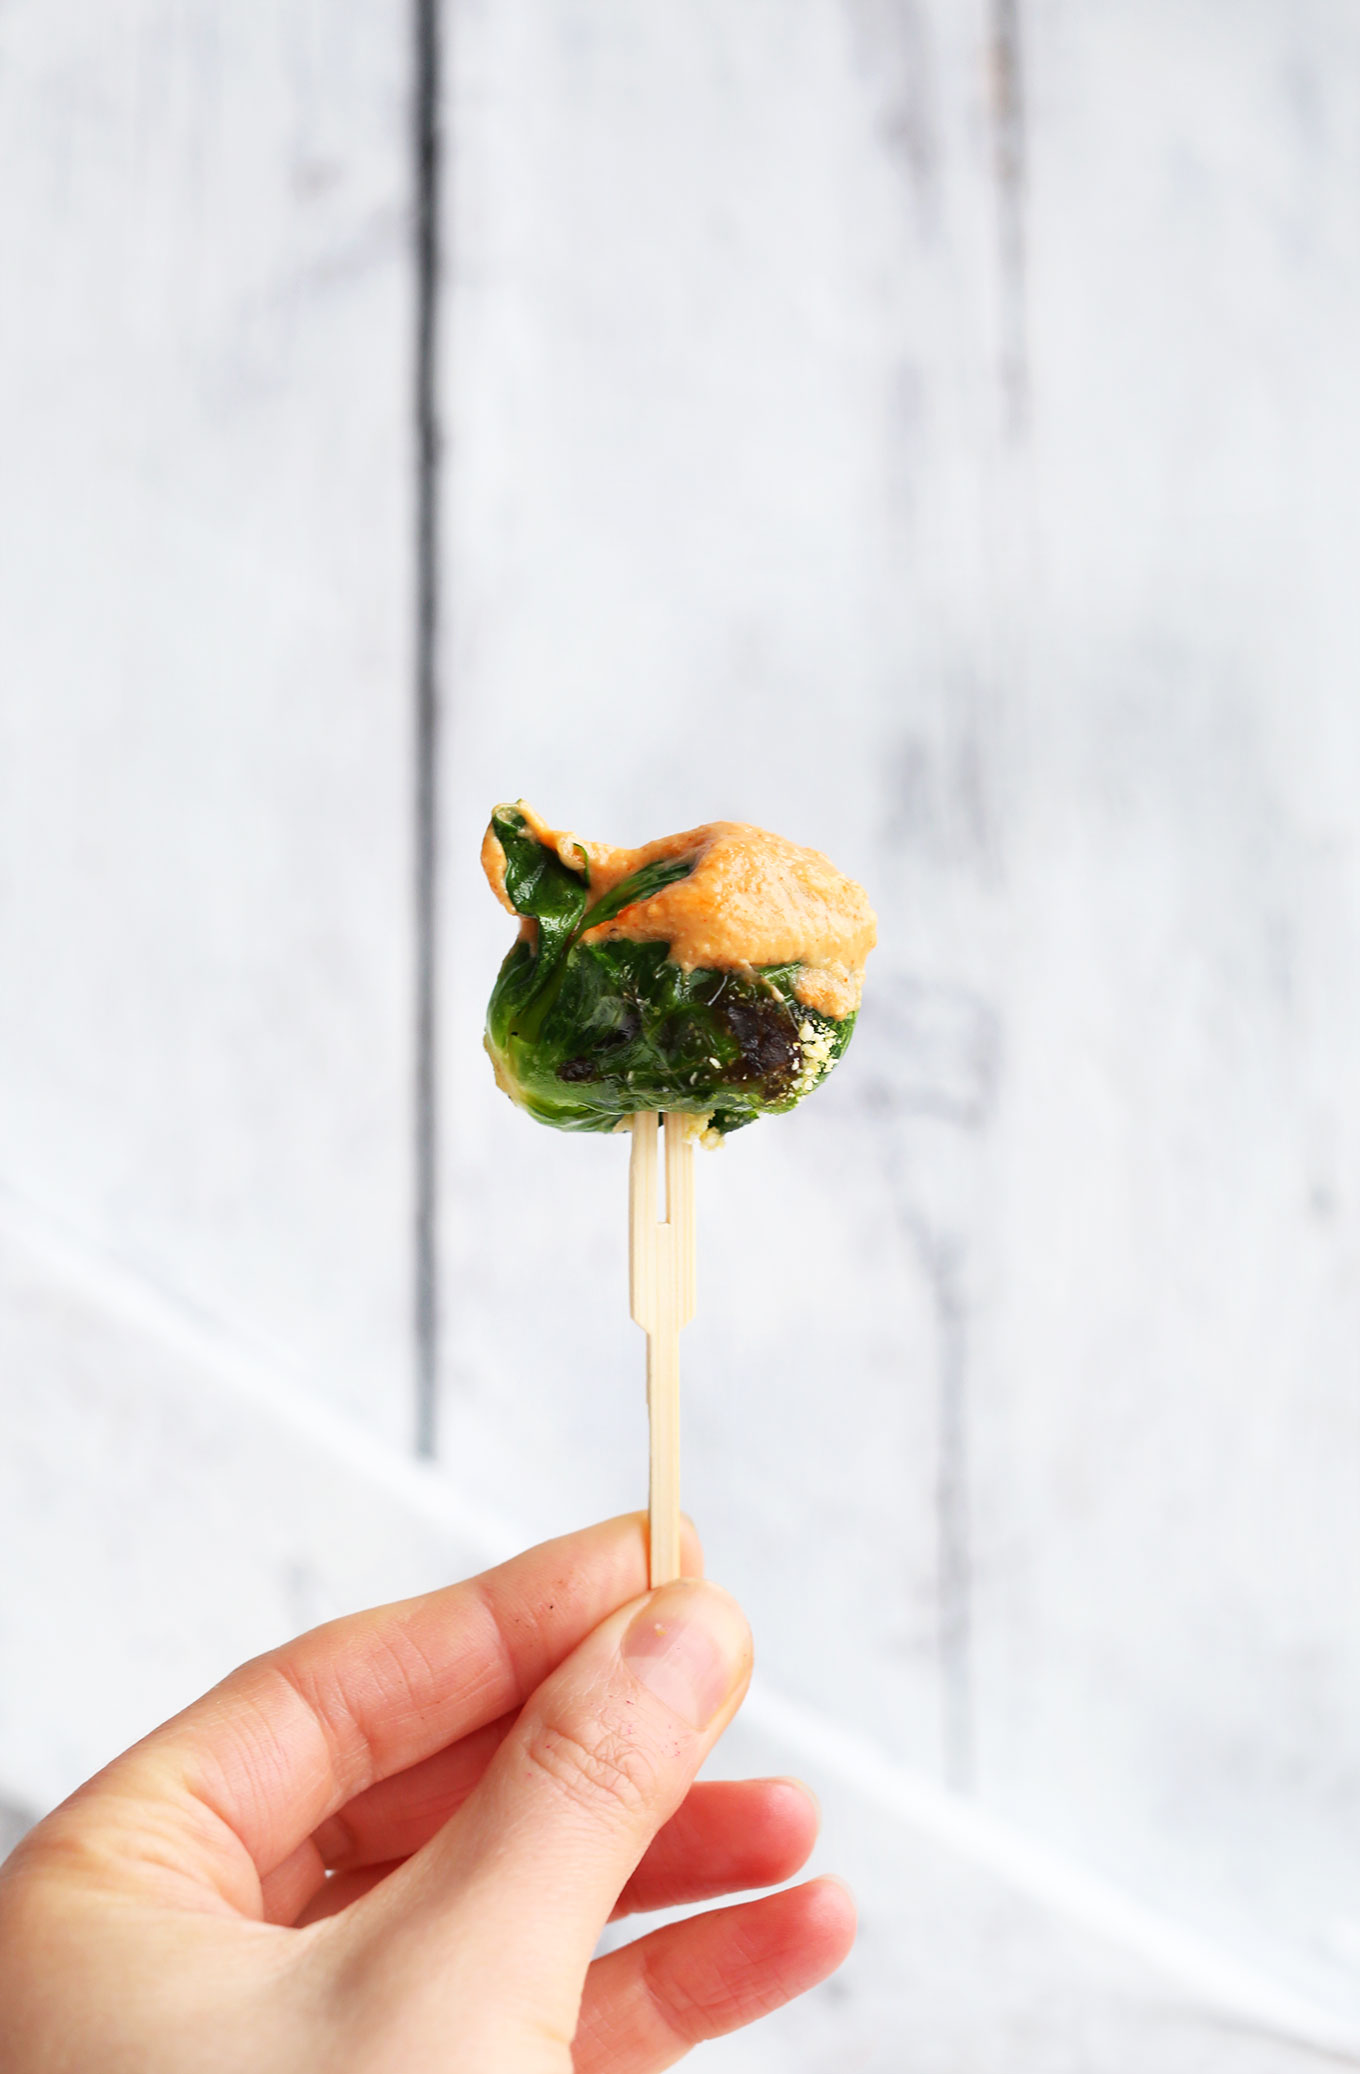 Toothpick holding up a Crispy Brussels Sprout topped with vegan Sriracha Aioli